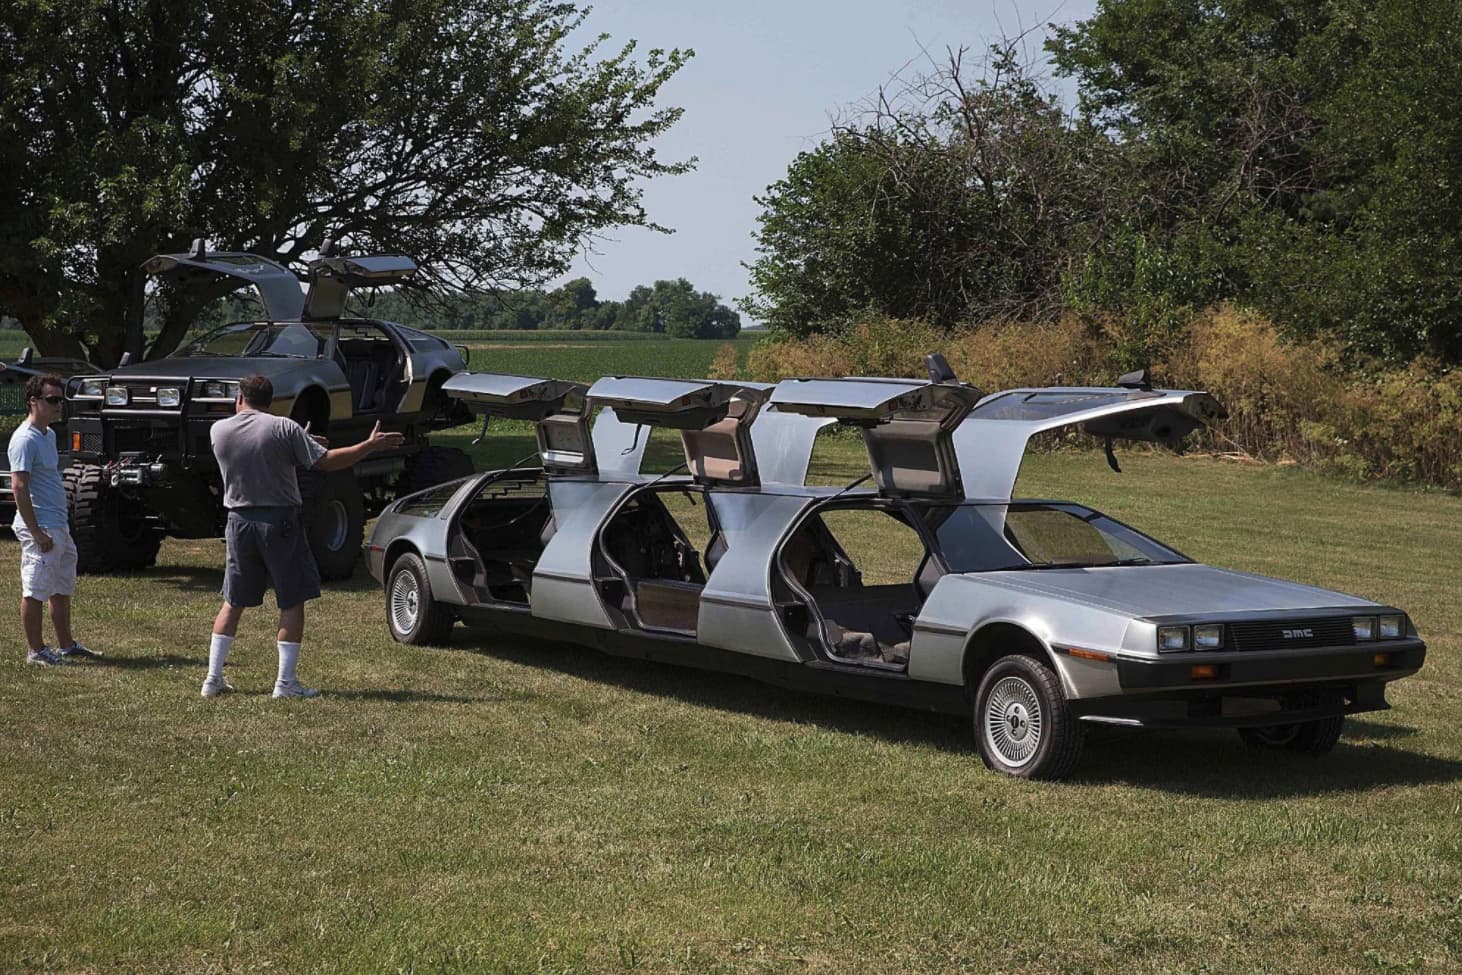 DeLorean Limo on Random Truly Strange Cars That Made Us Do A Double Take On The Open Road